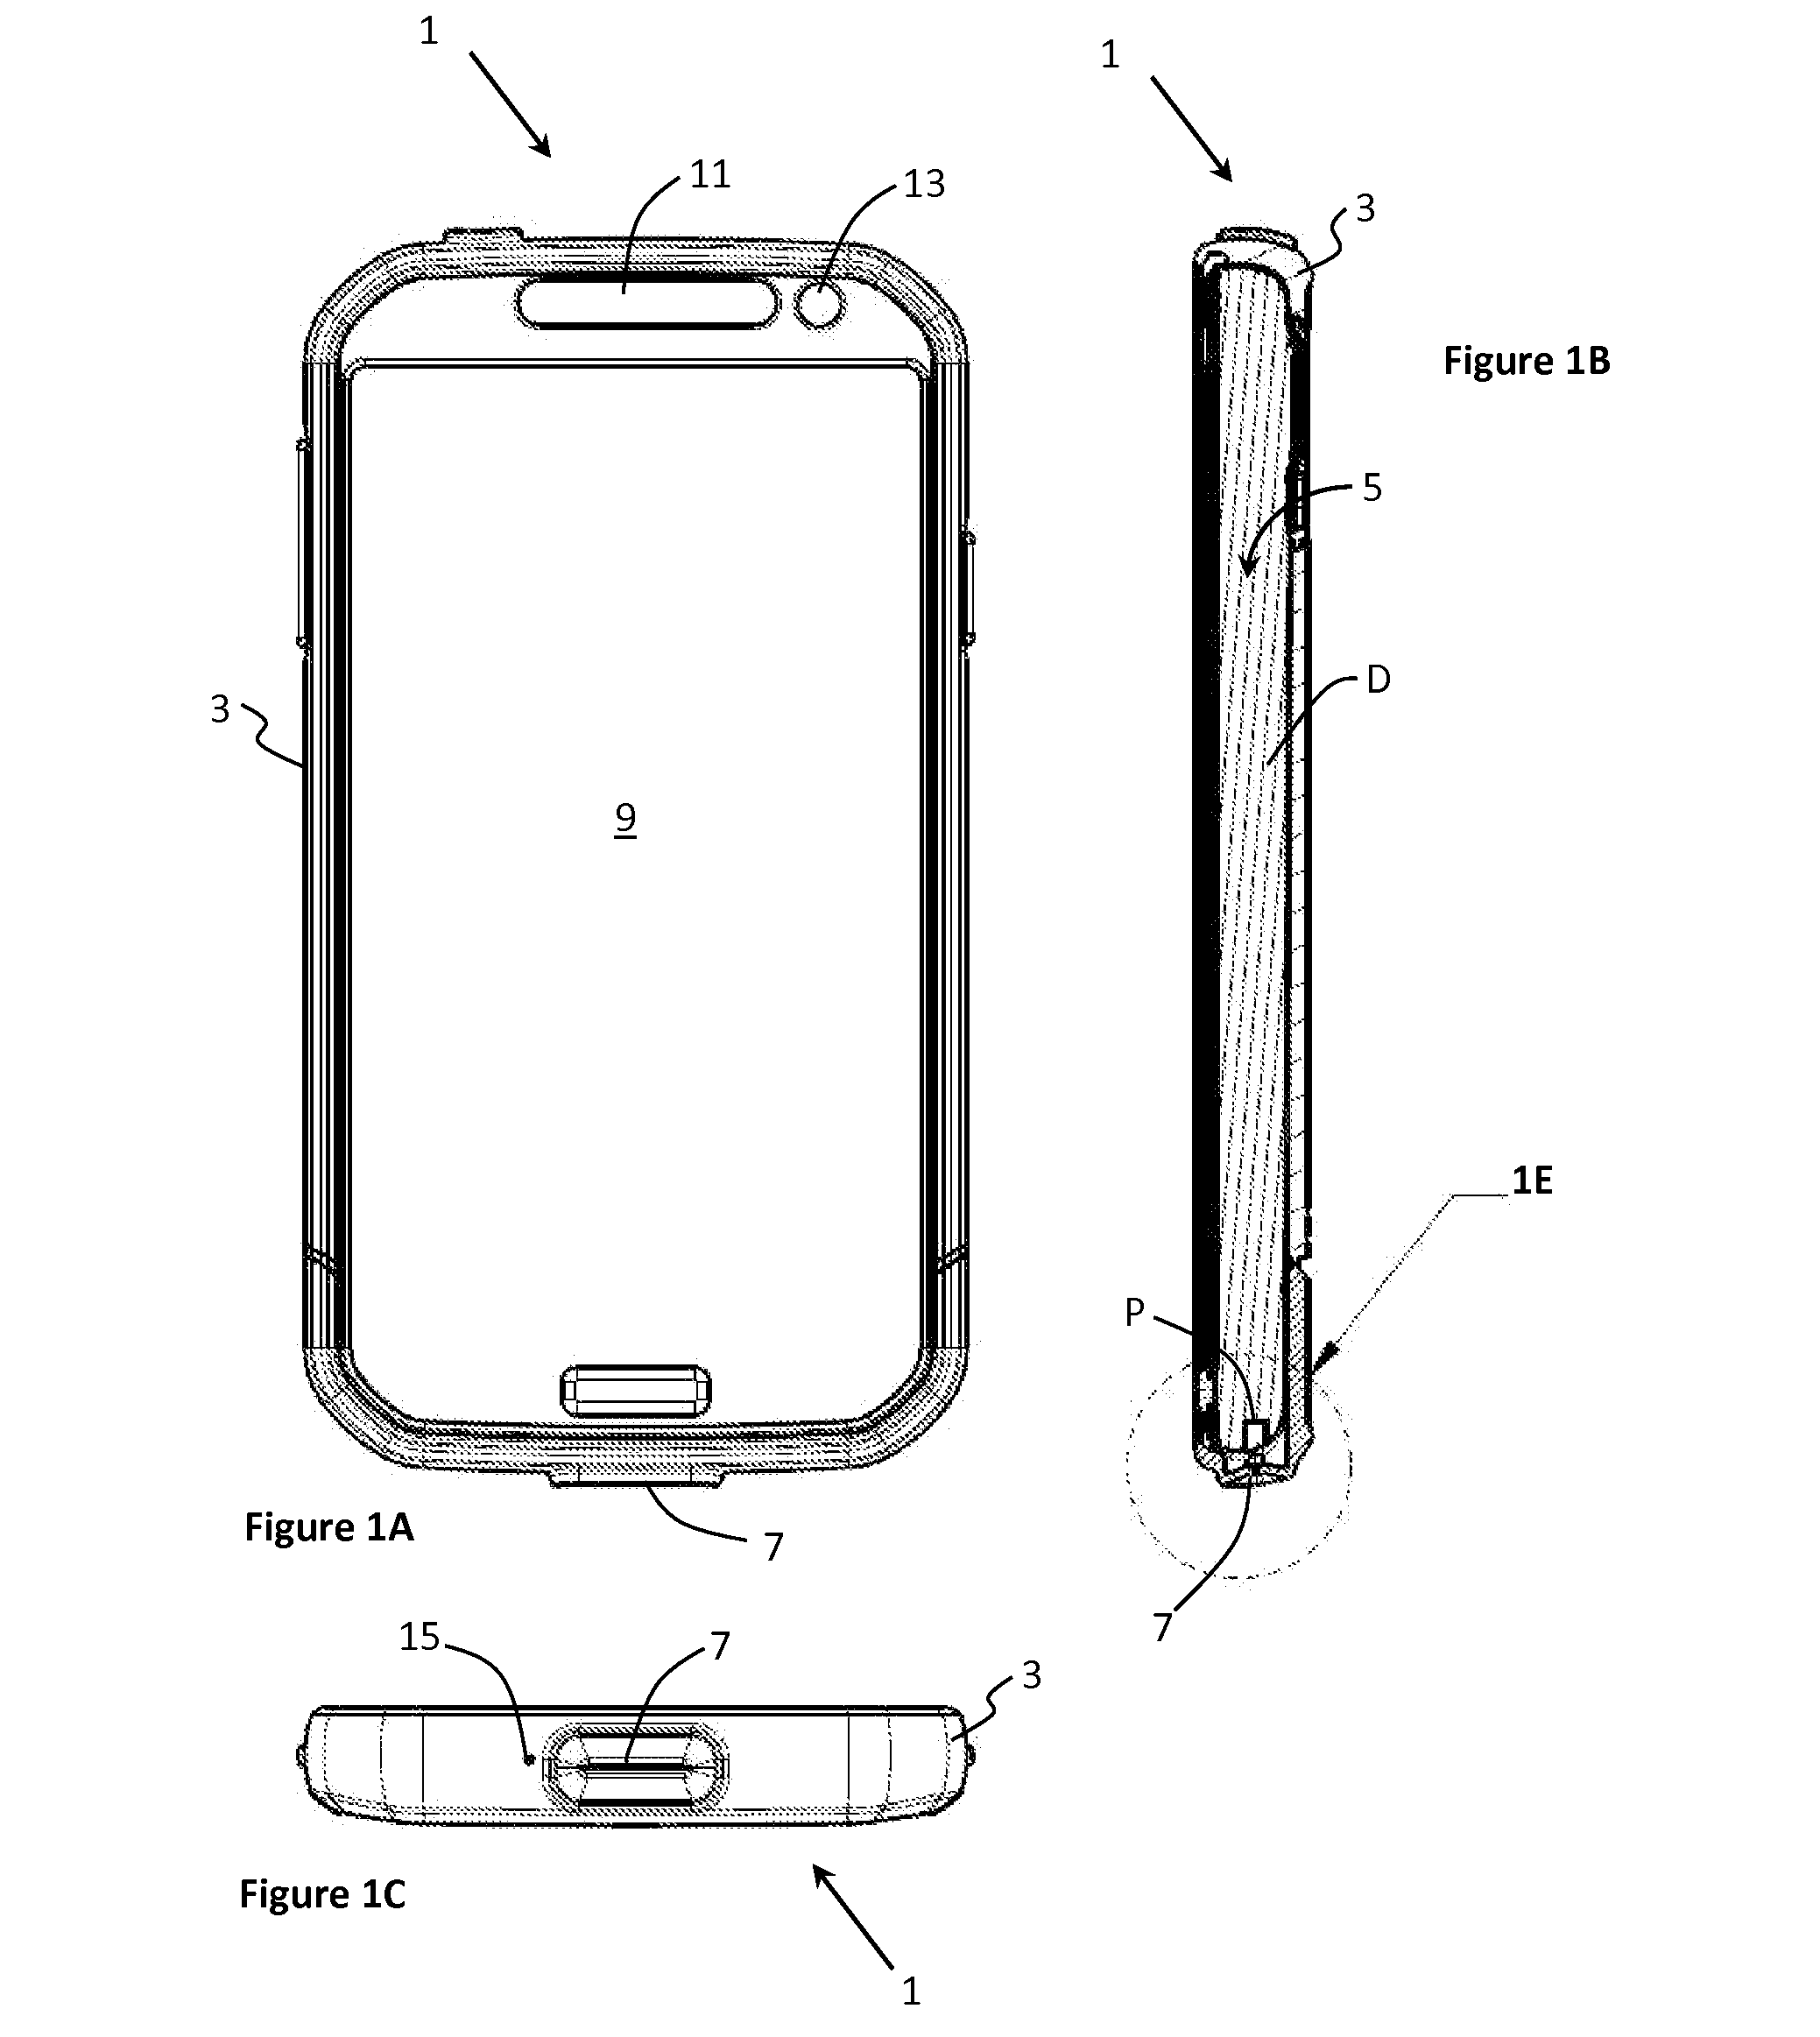 Protective case for mobile electronic device